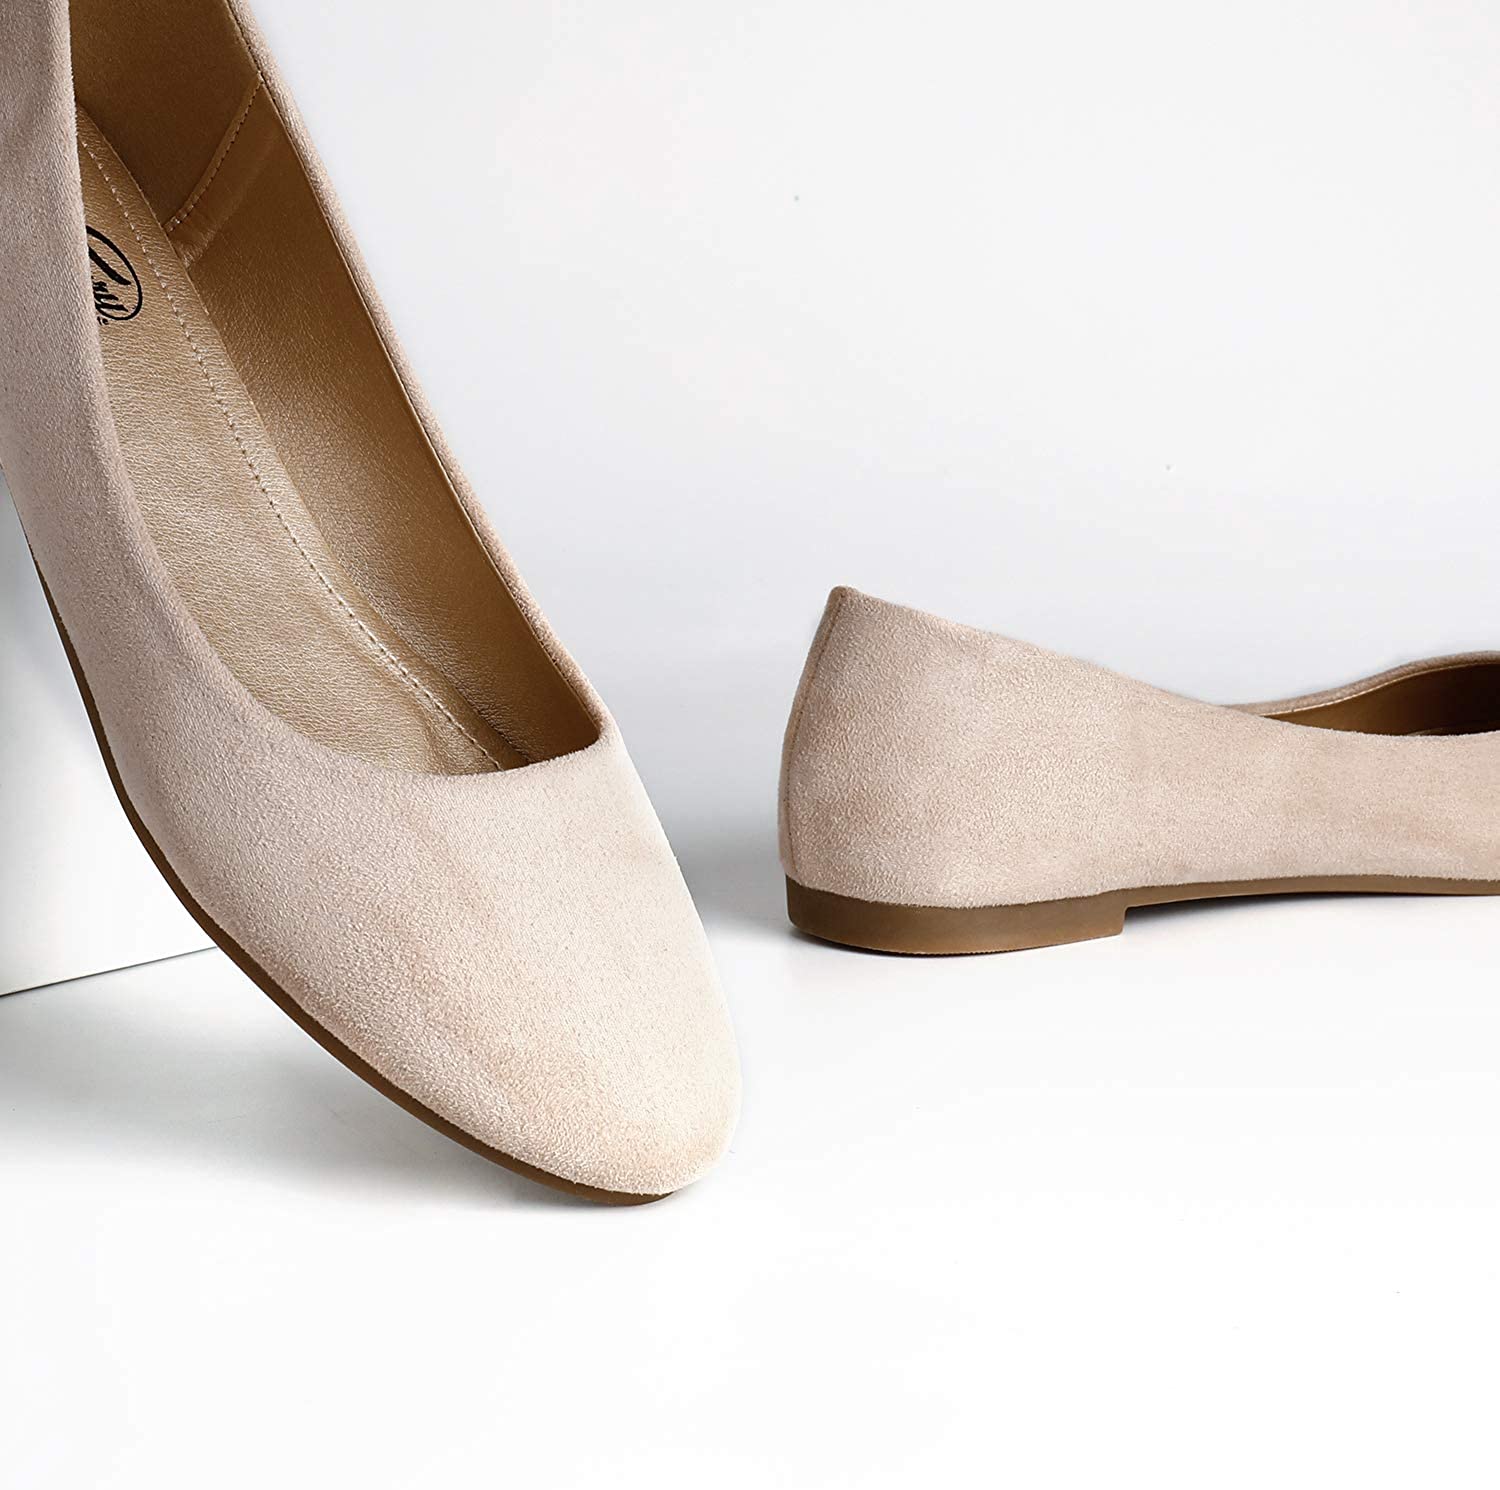 Buy Ravel ladies Newton court shoes online in natural nude 